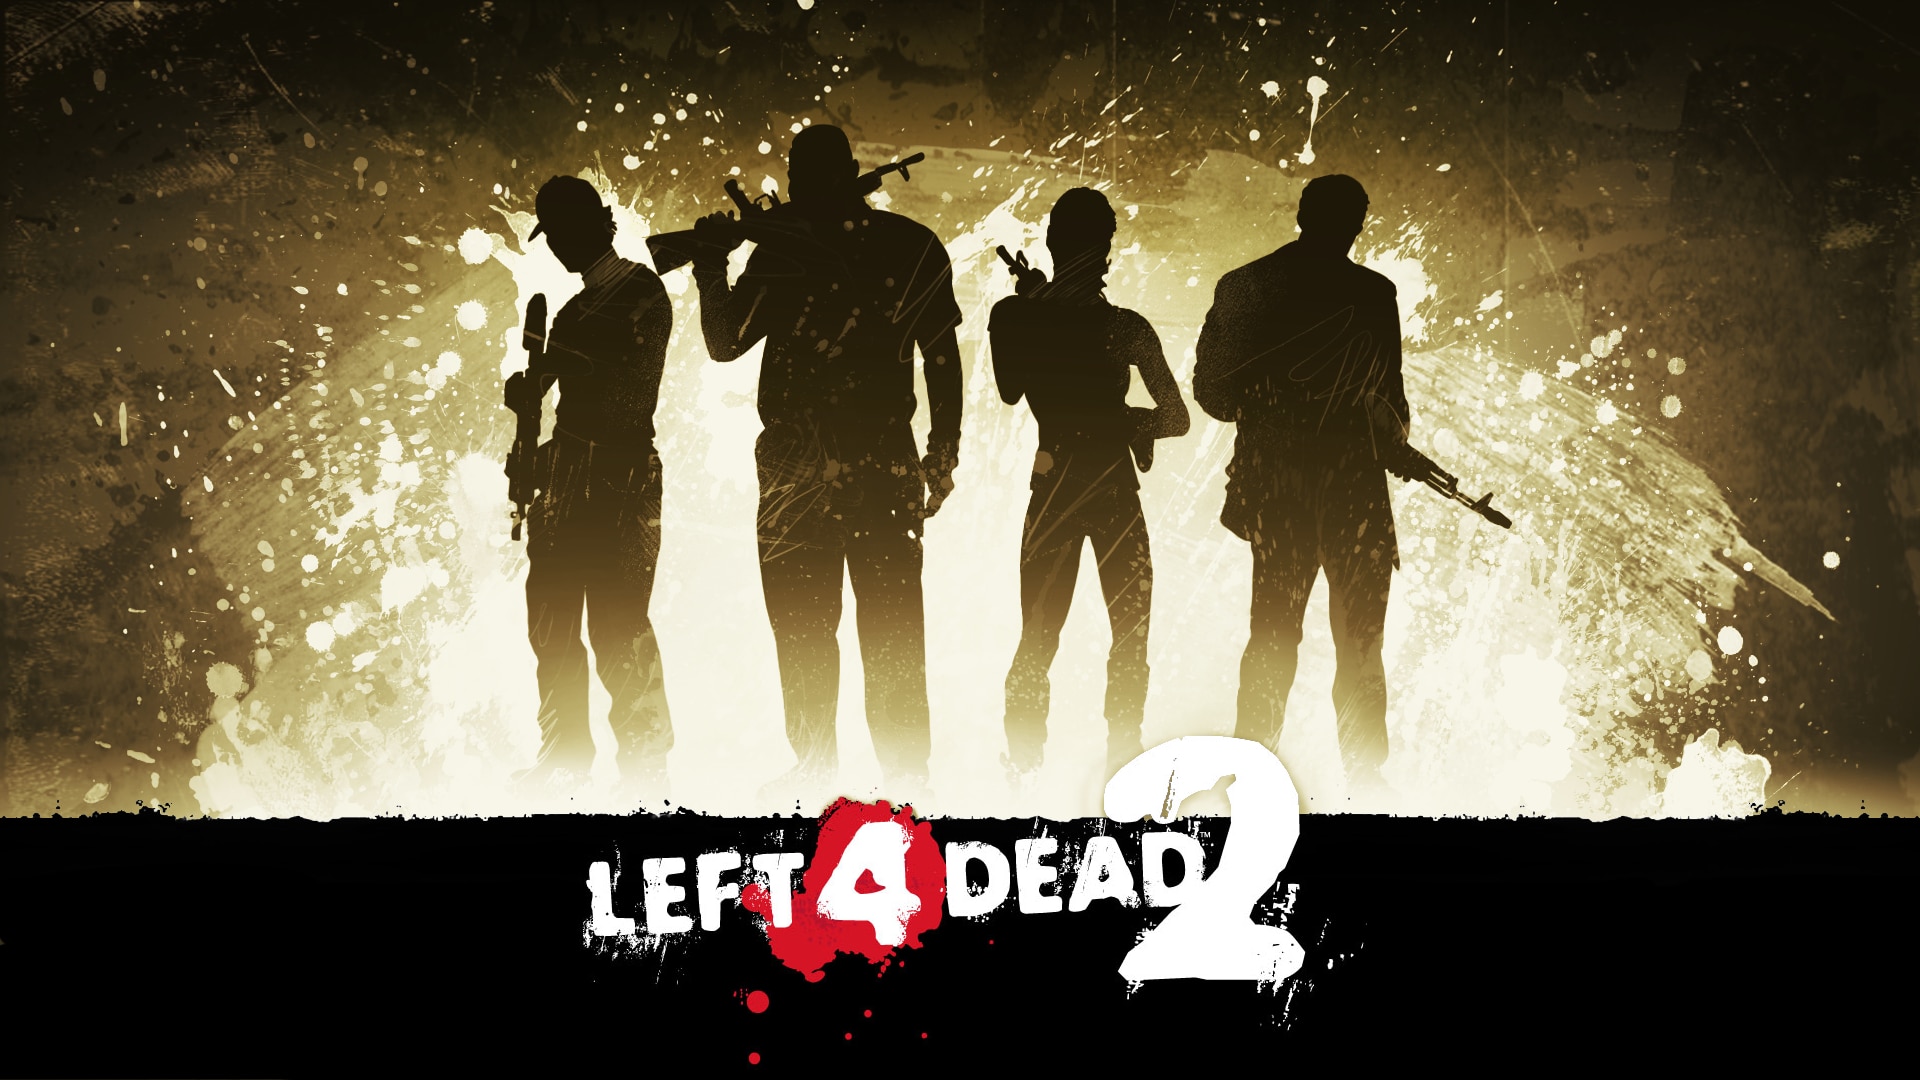 Zombie Army 4/ Left 4 Dead Bundle on Steam